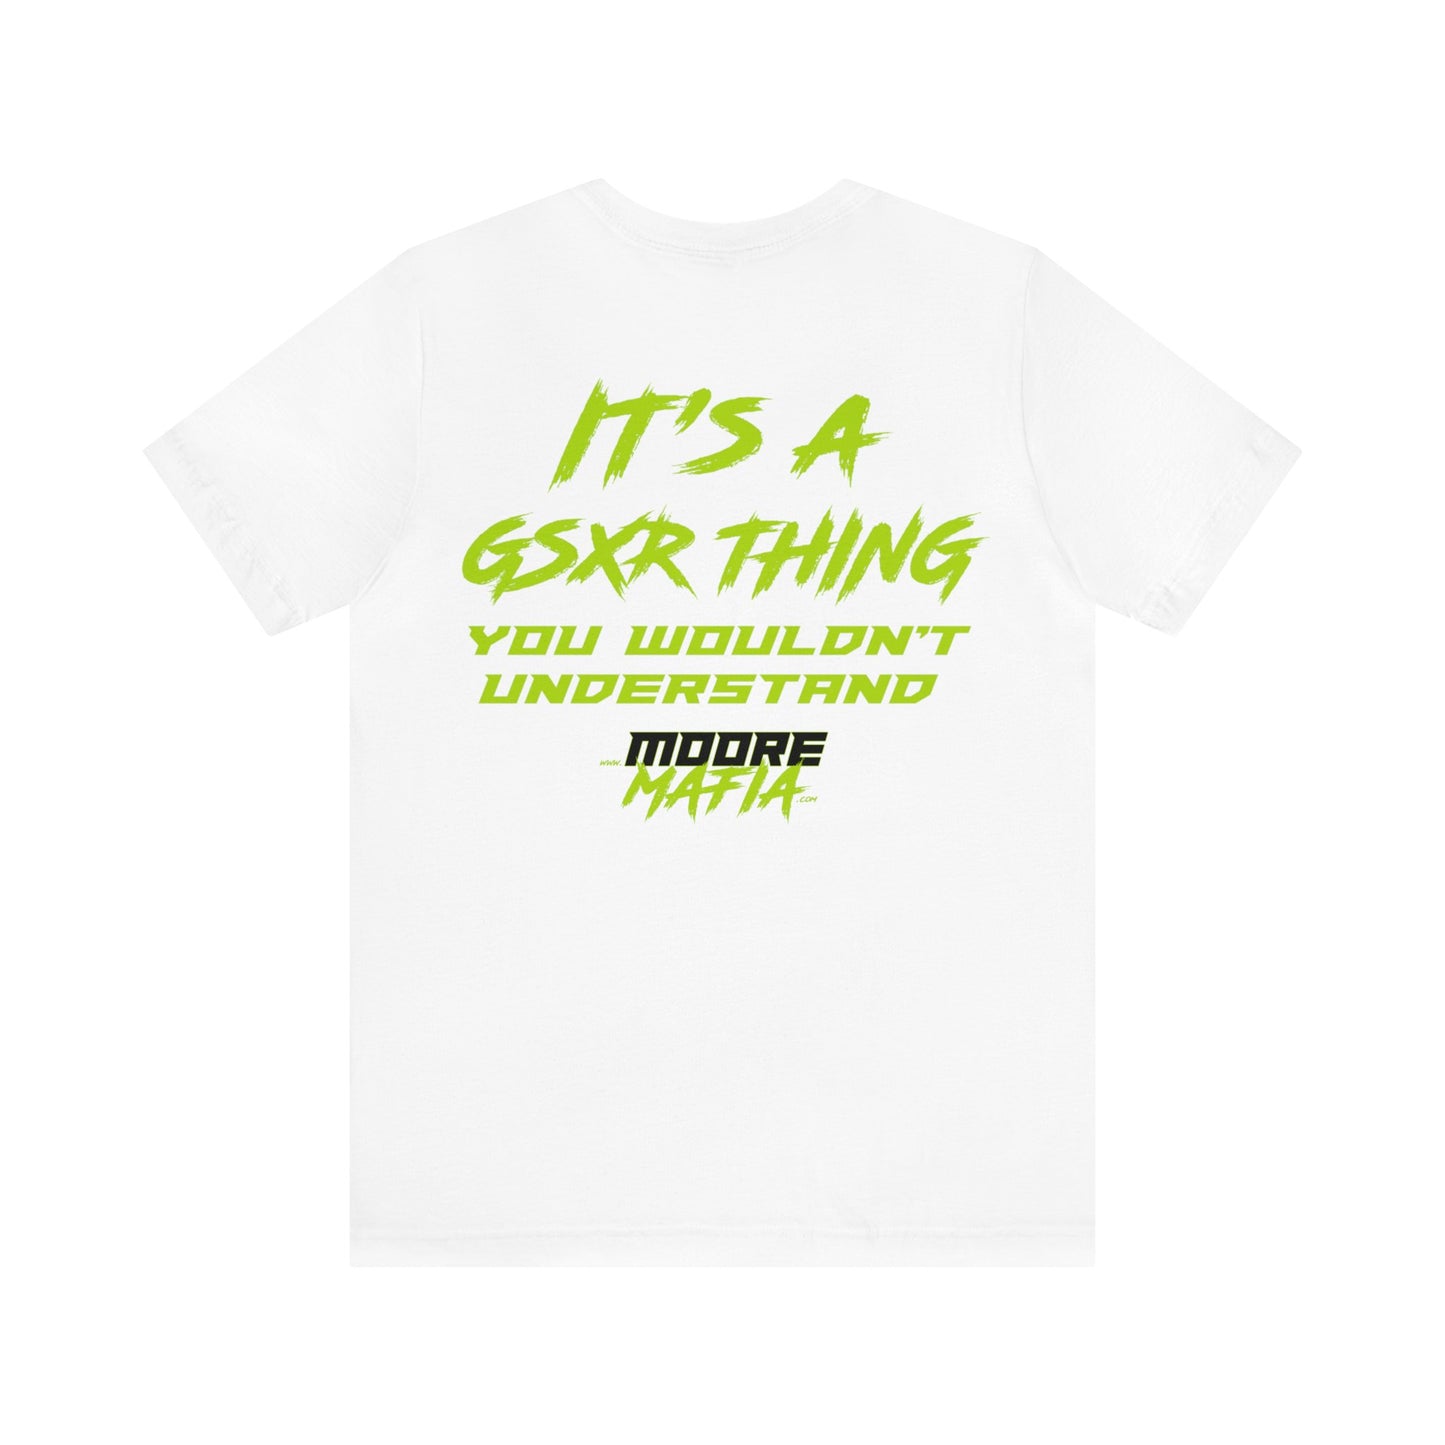 It's A GSXR Thing Yellow Unisex T-Shirt